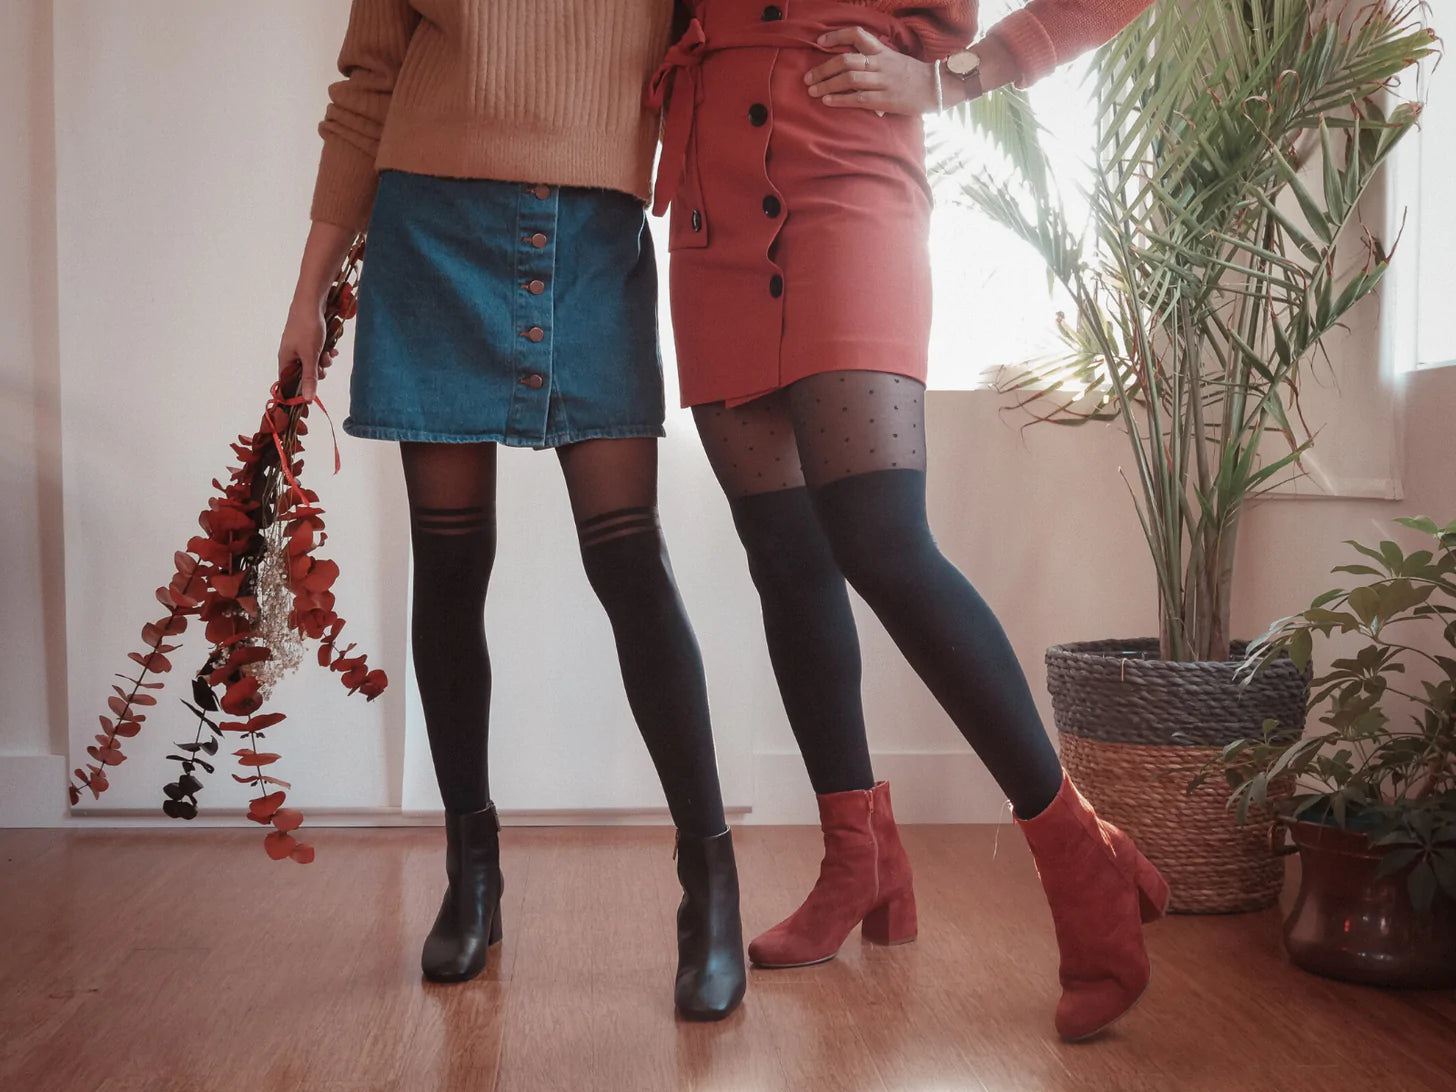 9 best pairs of patterned tights to shop this season - plus how to